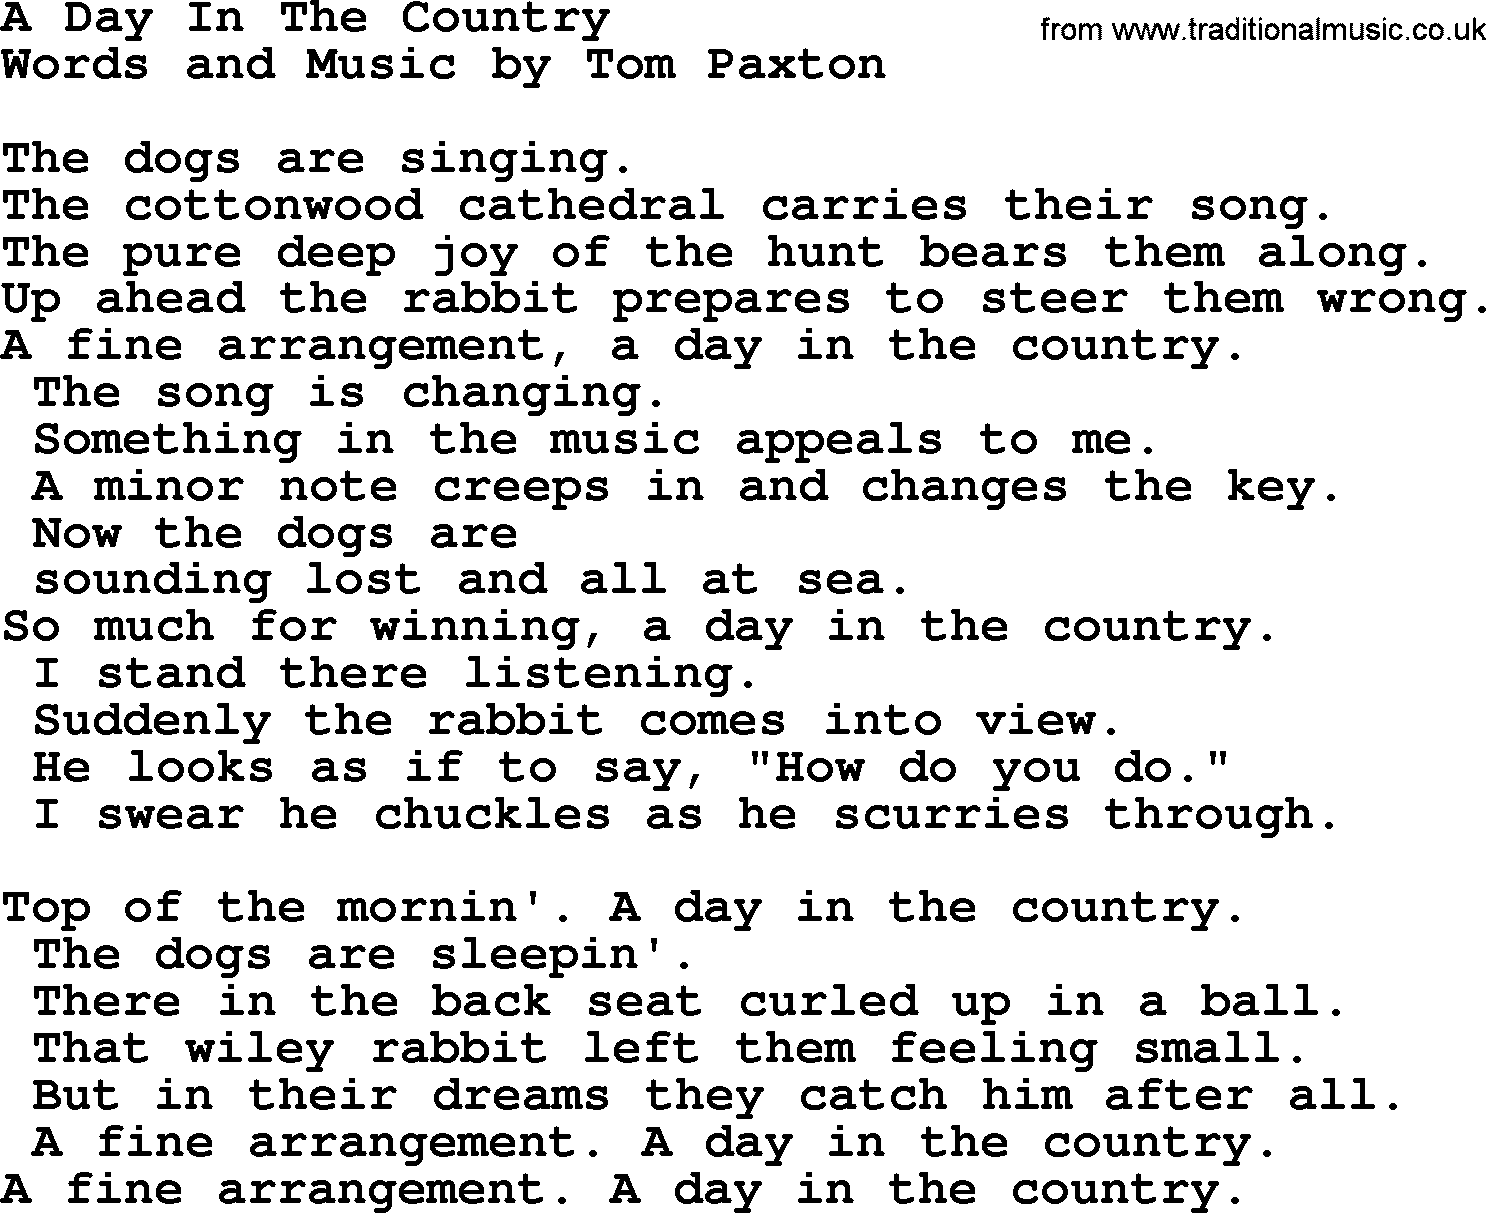 Tom Paxton song: A Day In The Country, lyrics